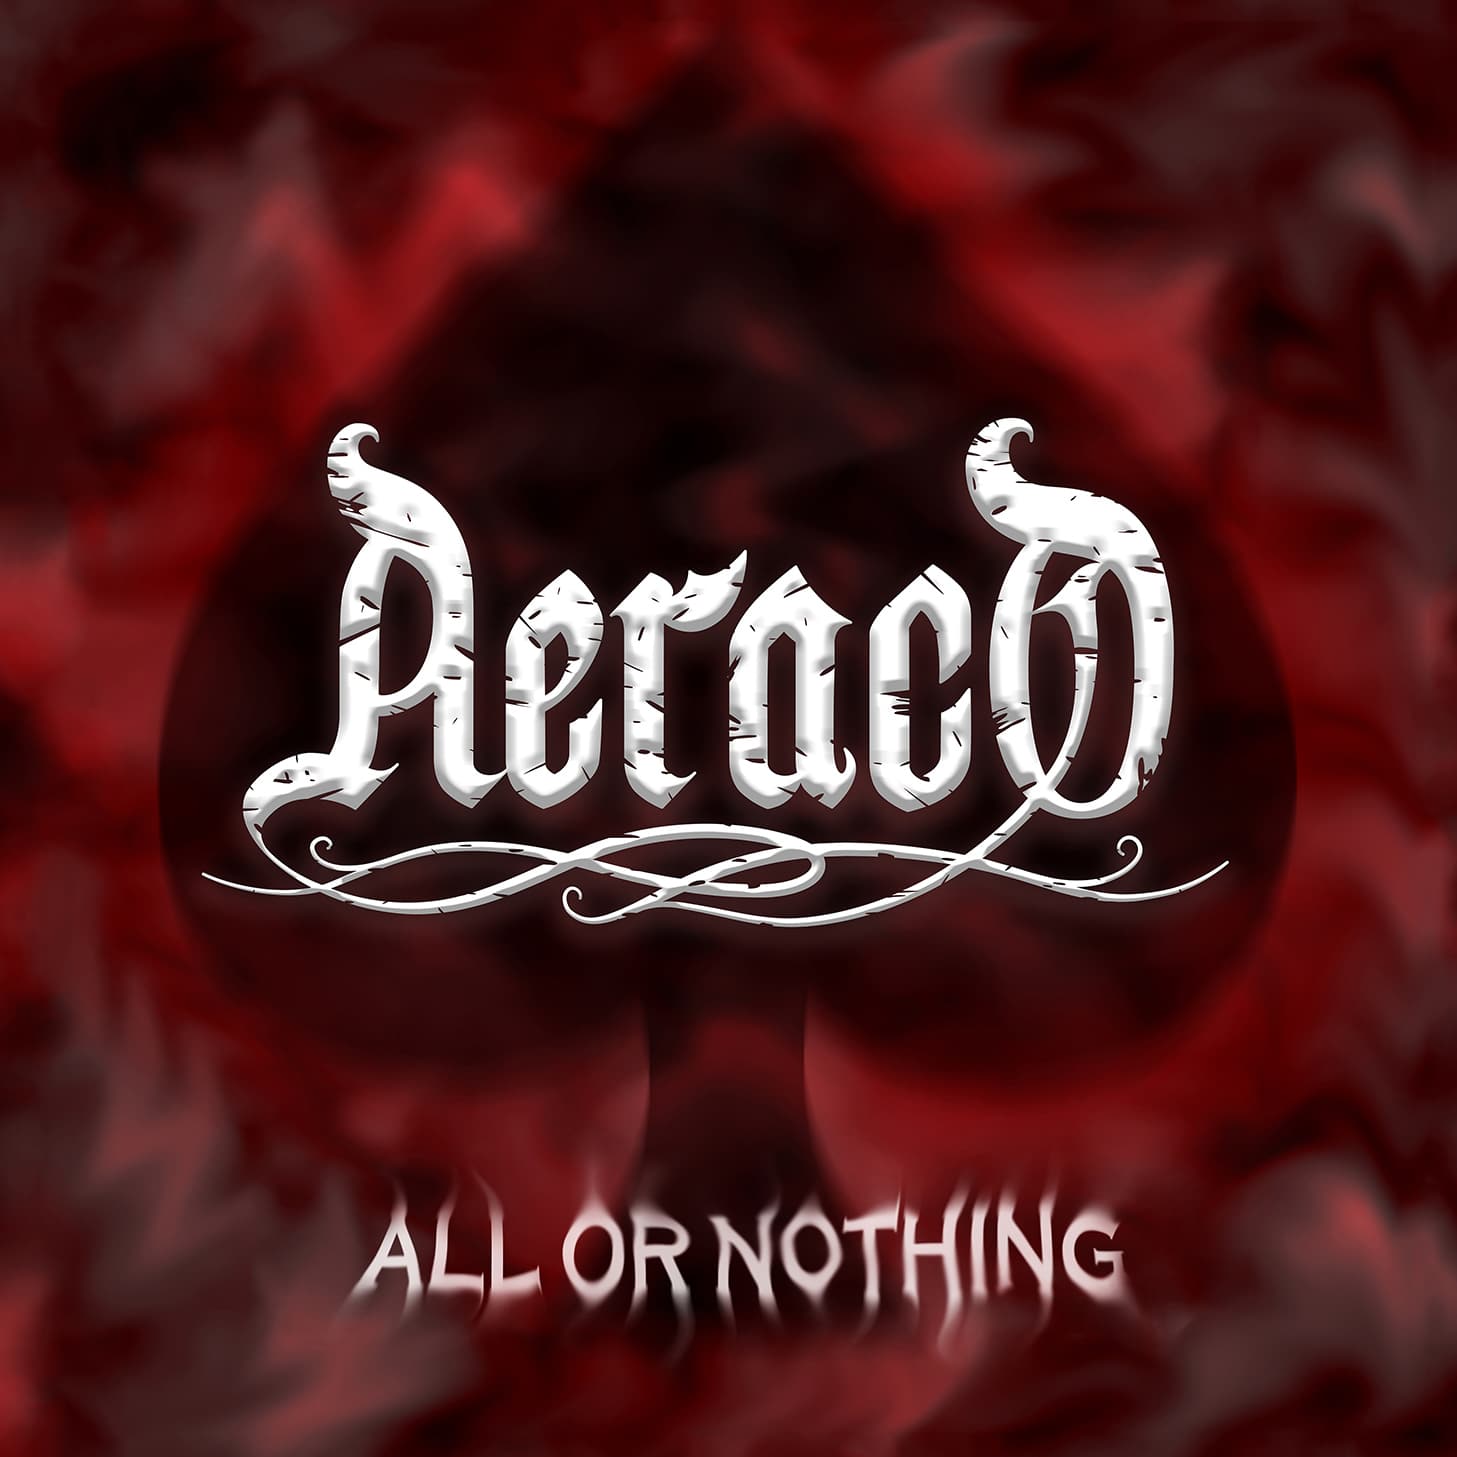 Aeraco – All or Nothing